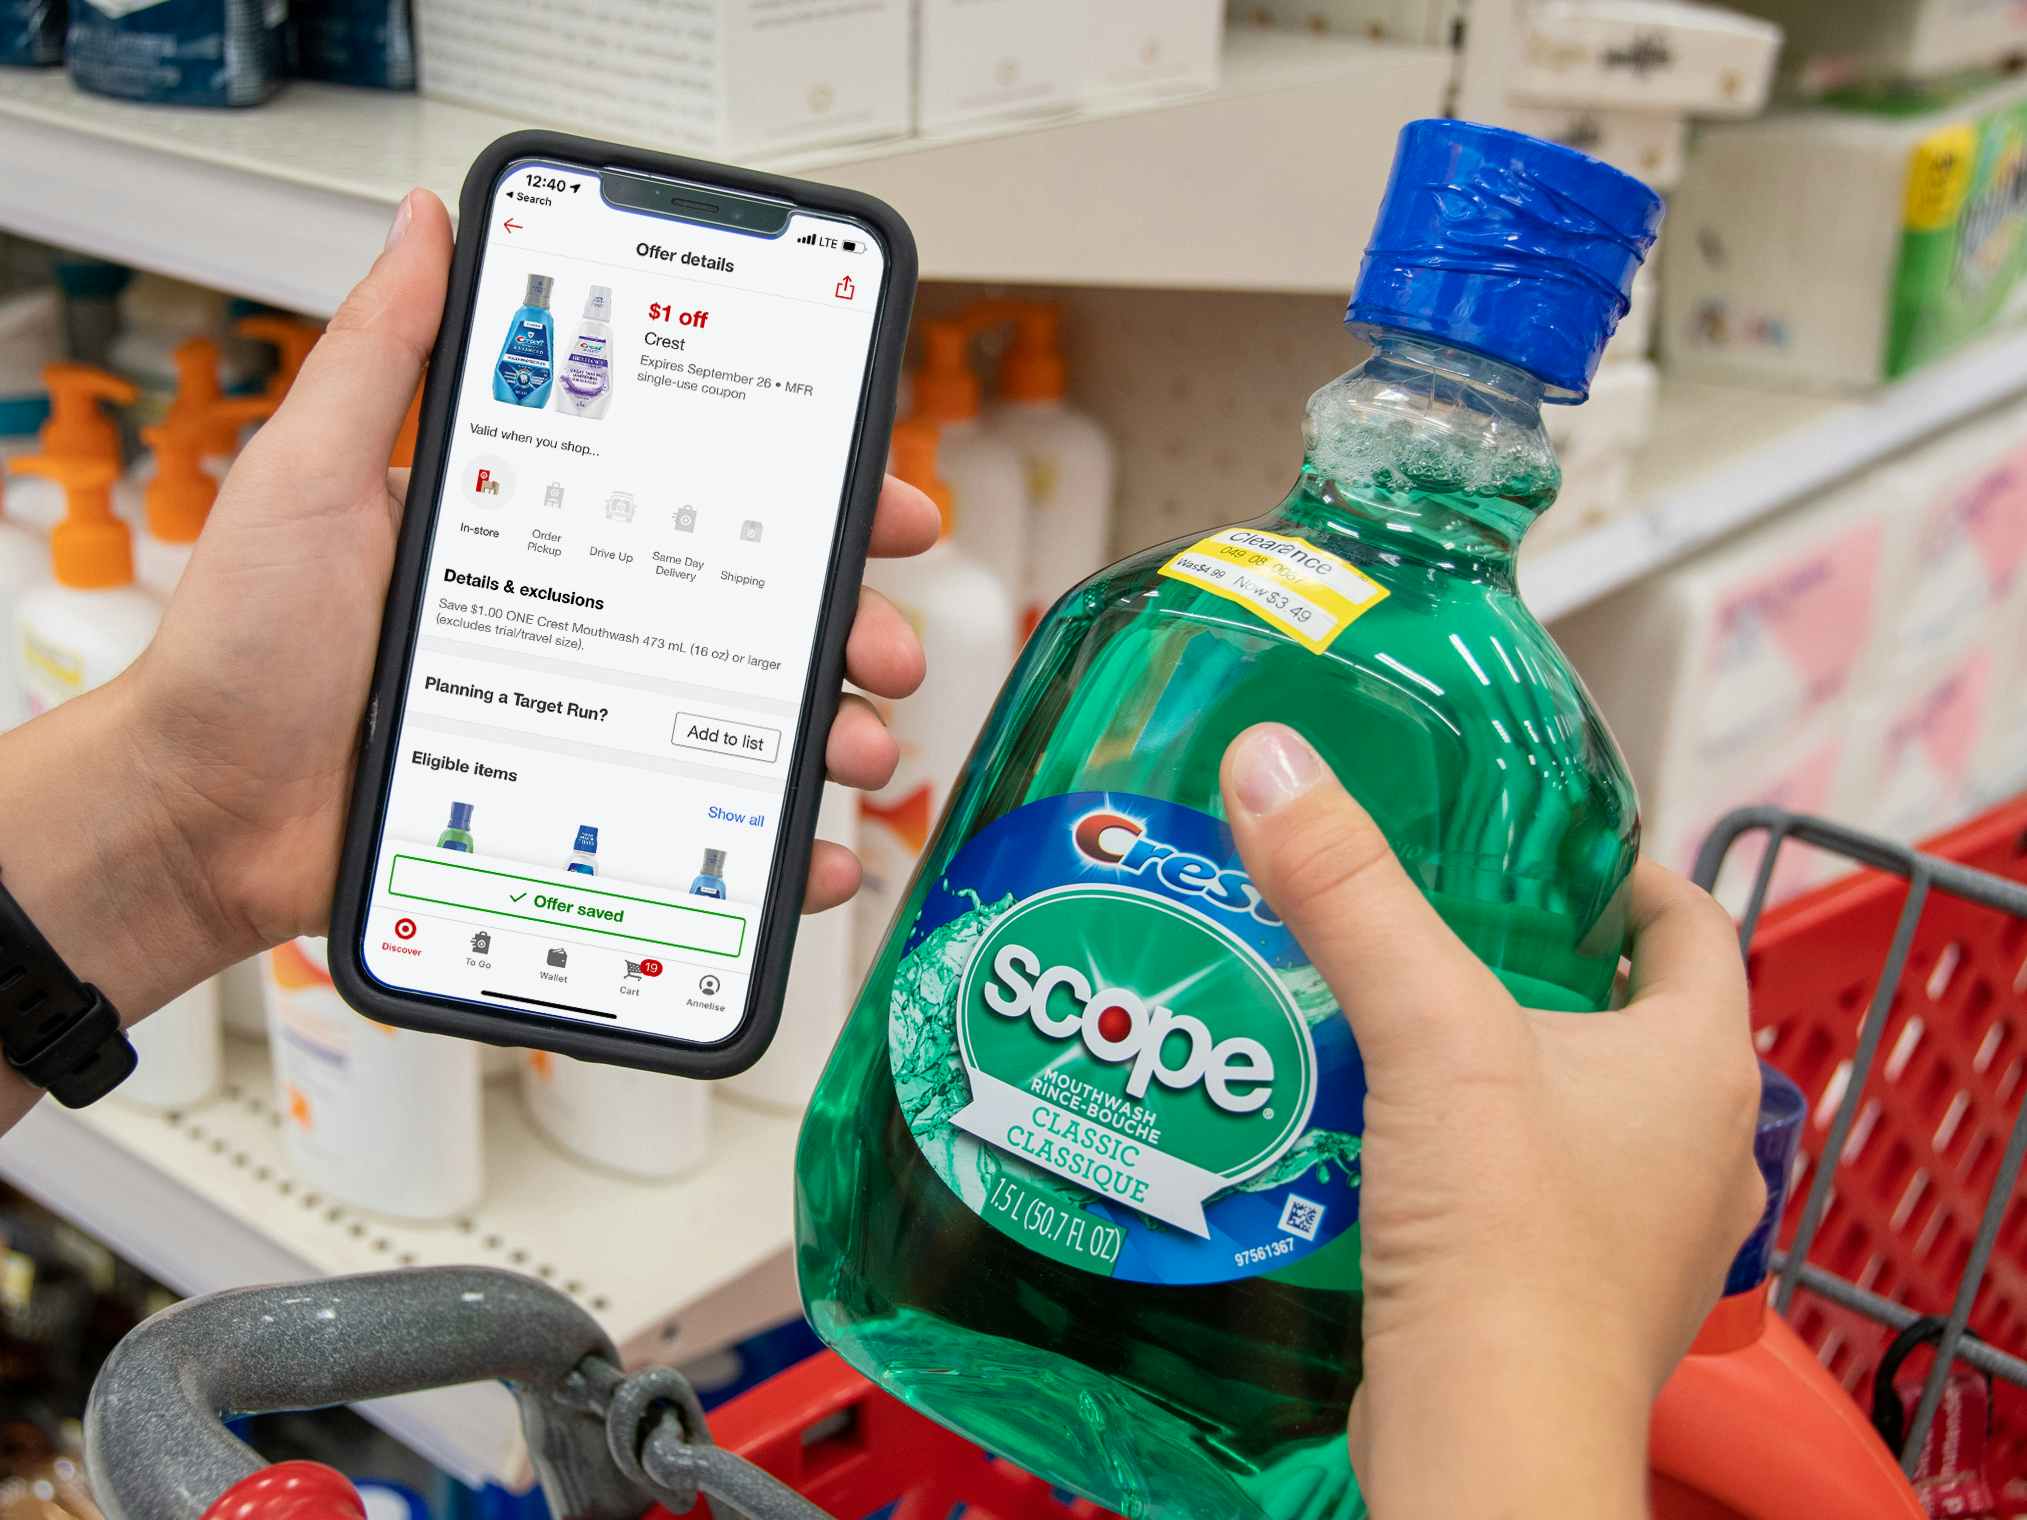 Target circle app with coupon next to Scope mouthwash with a clearance sticker